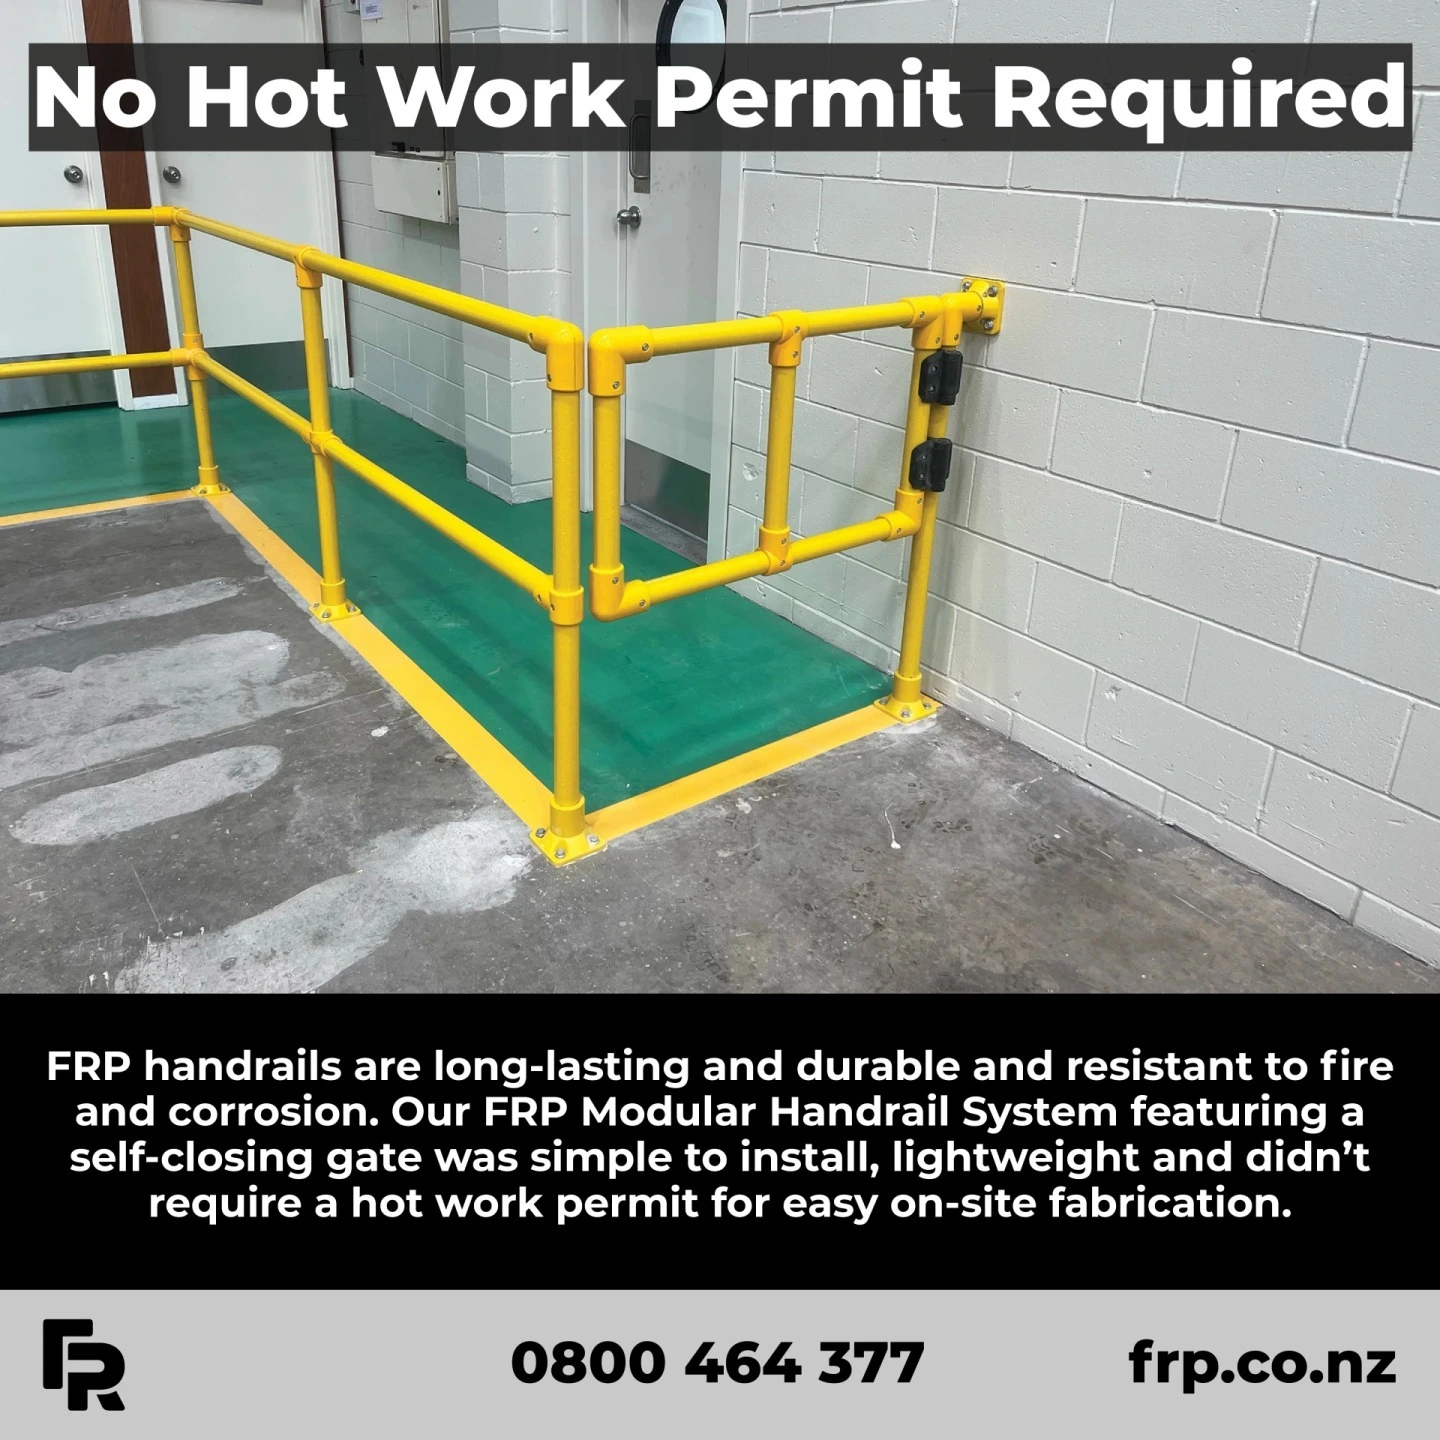 Let us know how we can help!

#frp #frpproducts #industrial #engineers #engineering #commercial #factories #handrails